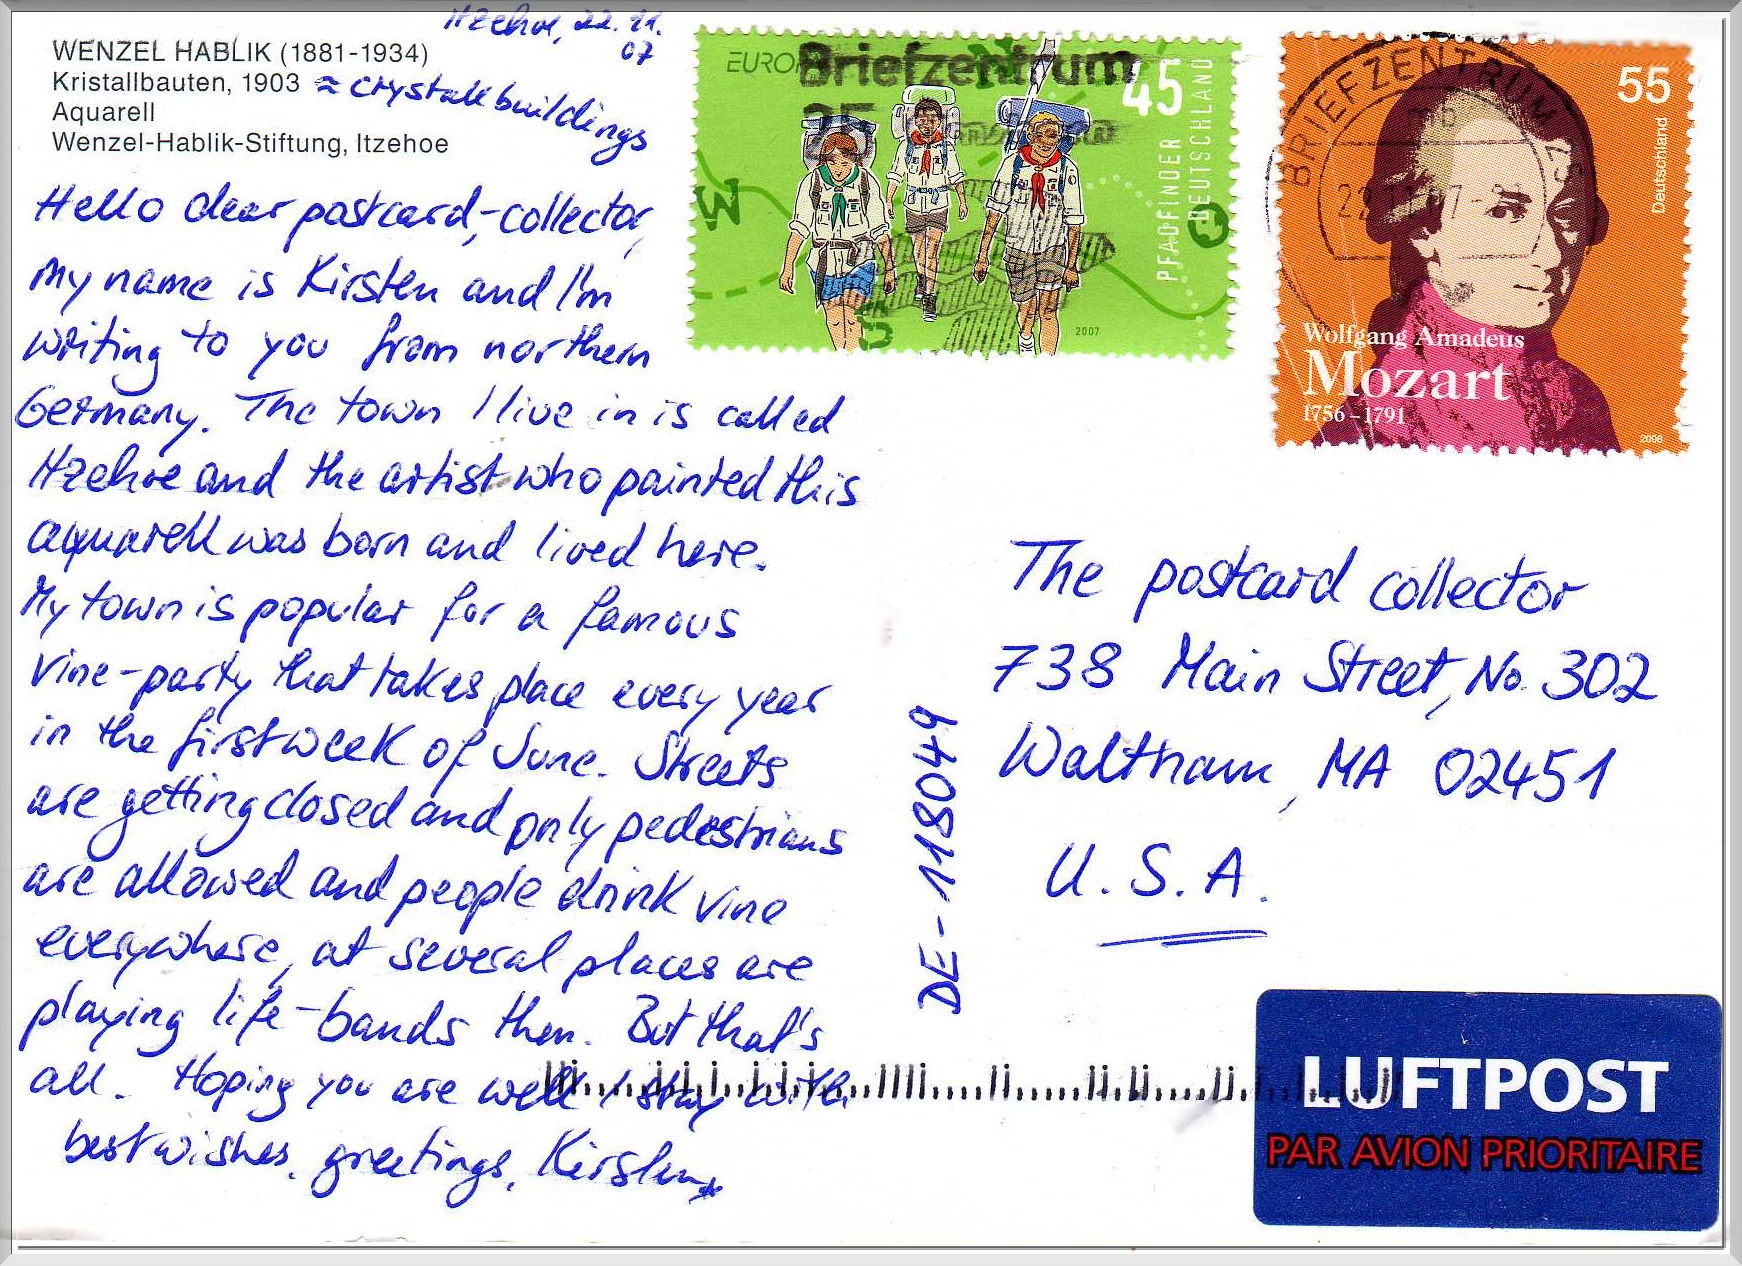 Postcrossing 1 Itzehoe Germany The Postcard Collector